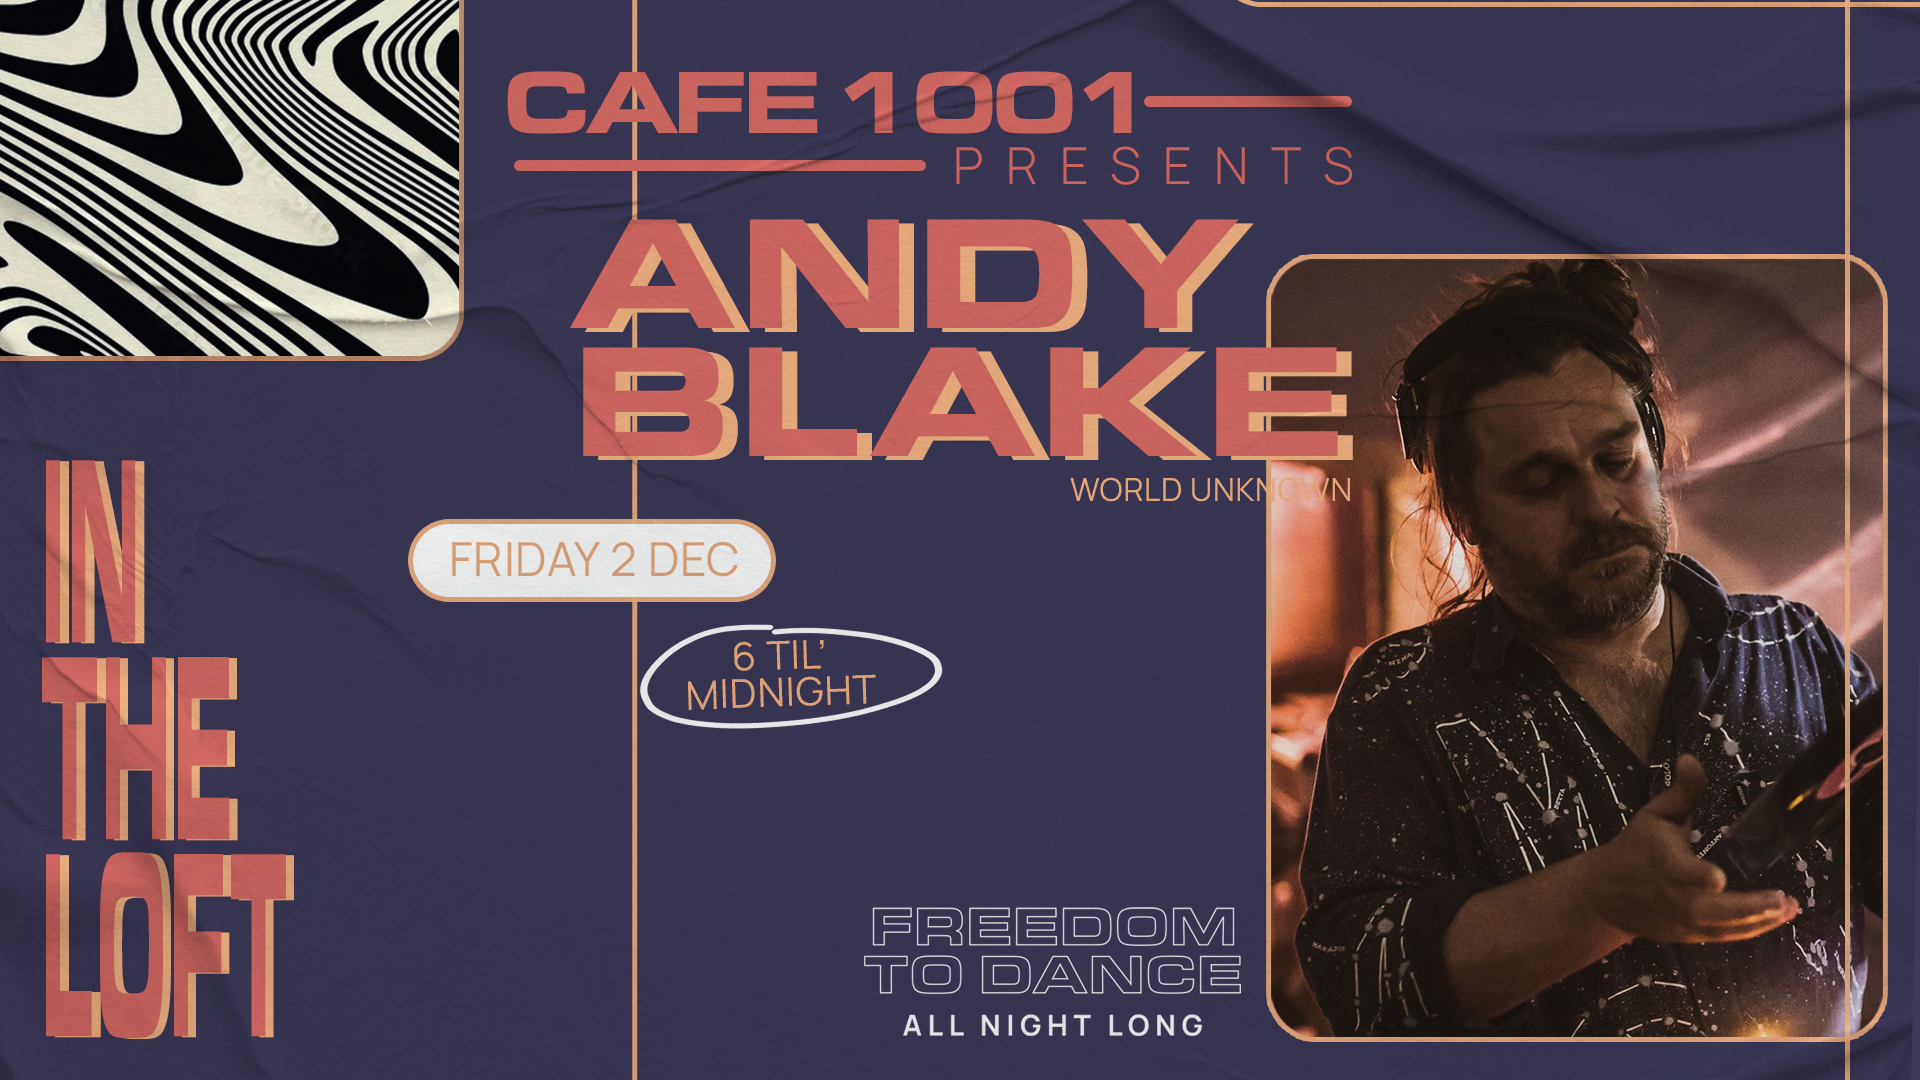 Cafe 1001 presents: Andy Blake (All Evening Long)  - Página frontal